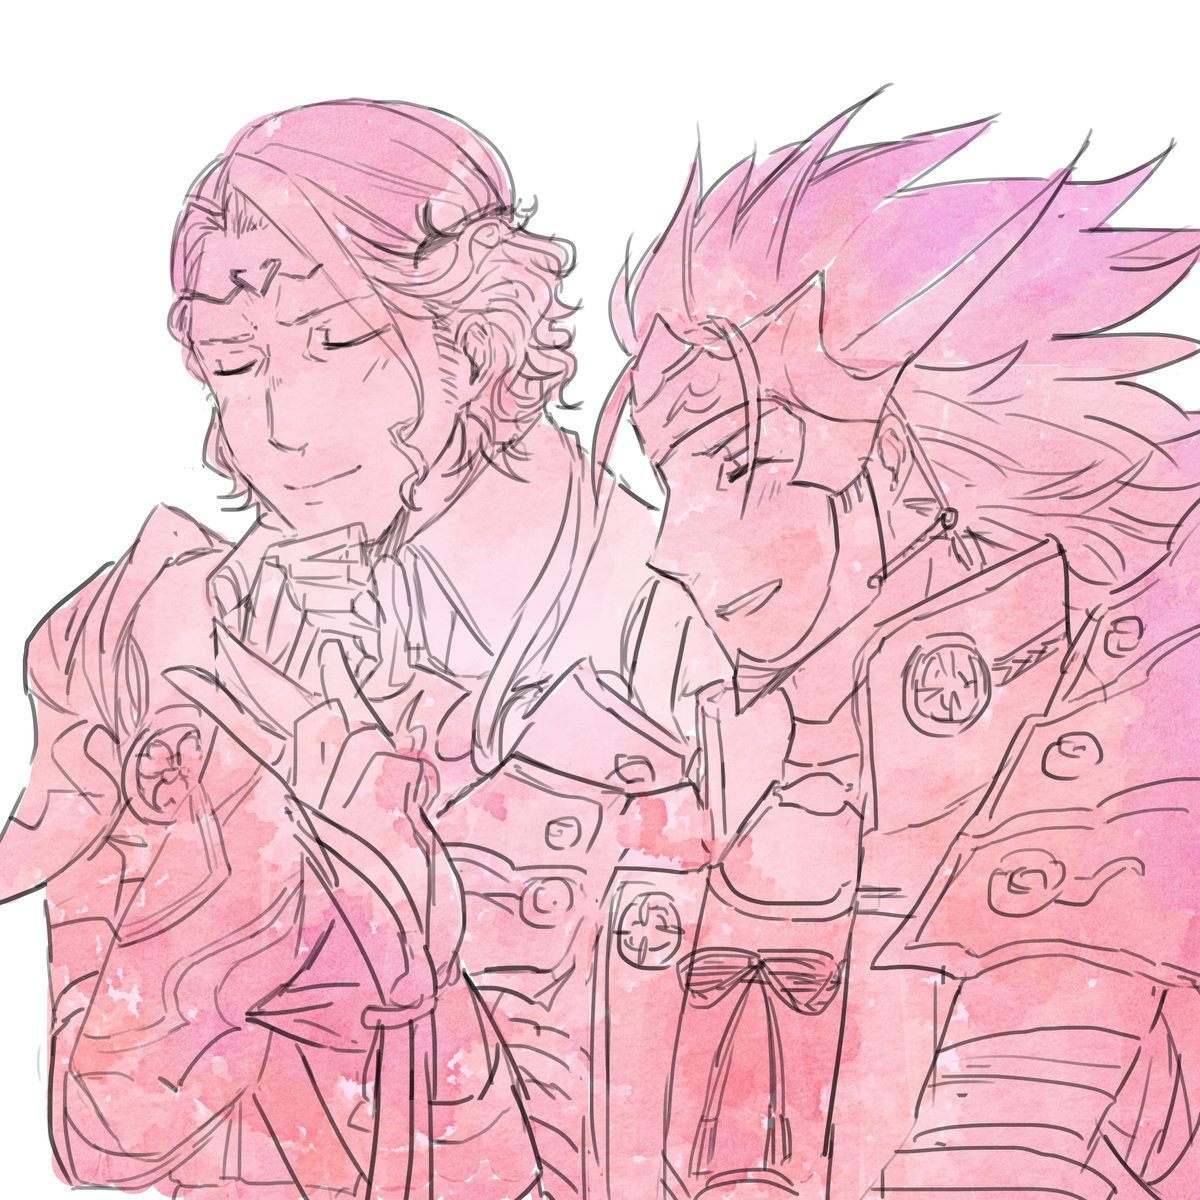 14. Ryoma/Xander"And on that day, I hope to call you not just an ally...but perhaps a friend as well."